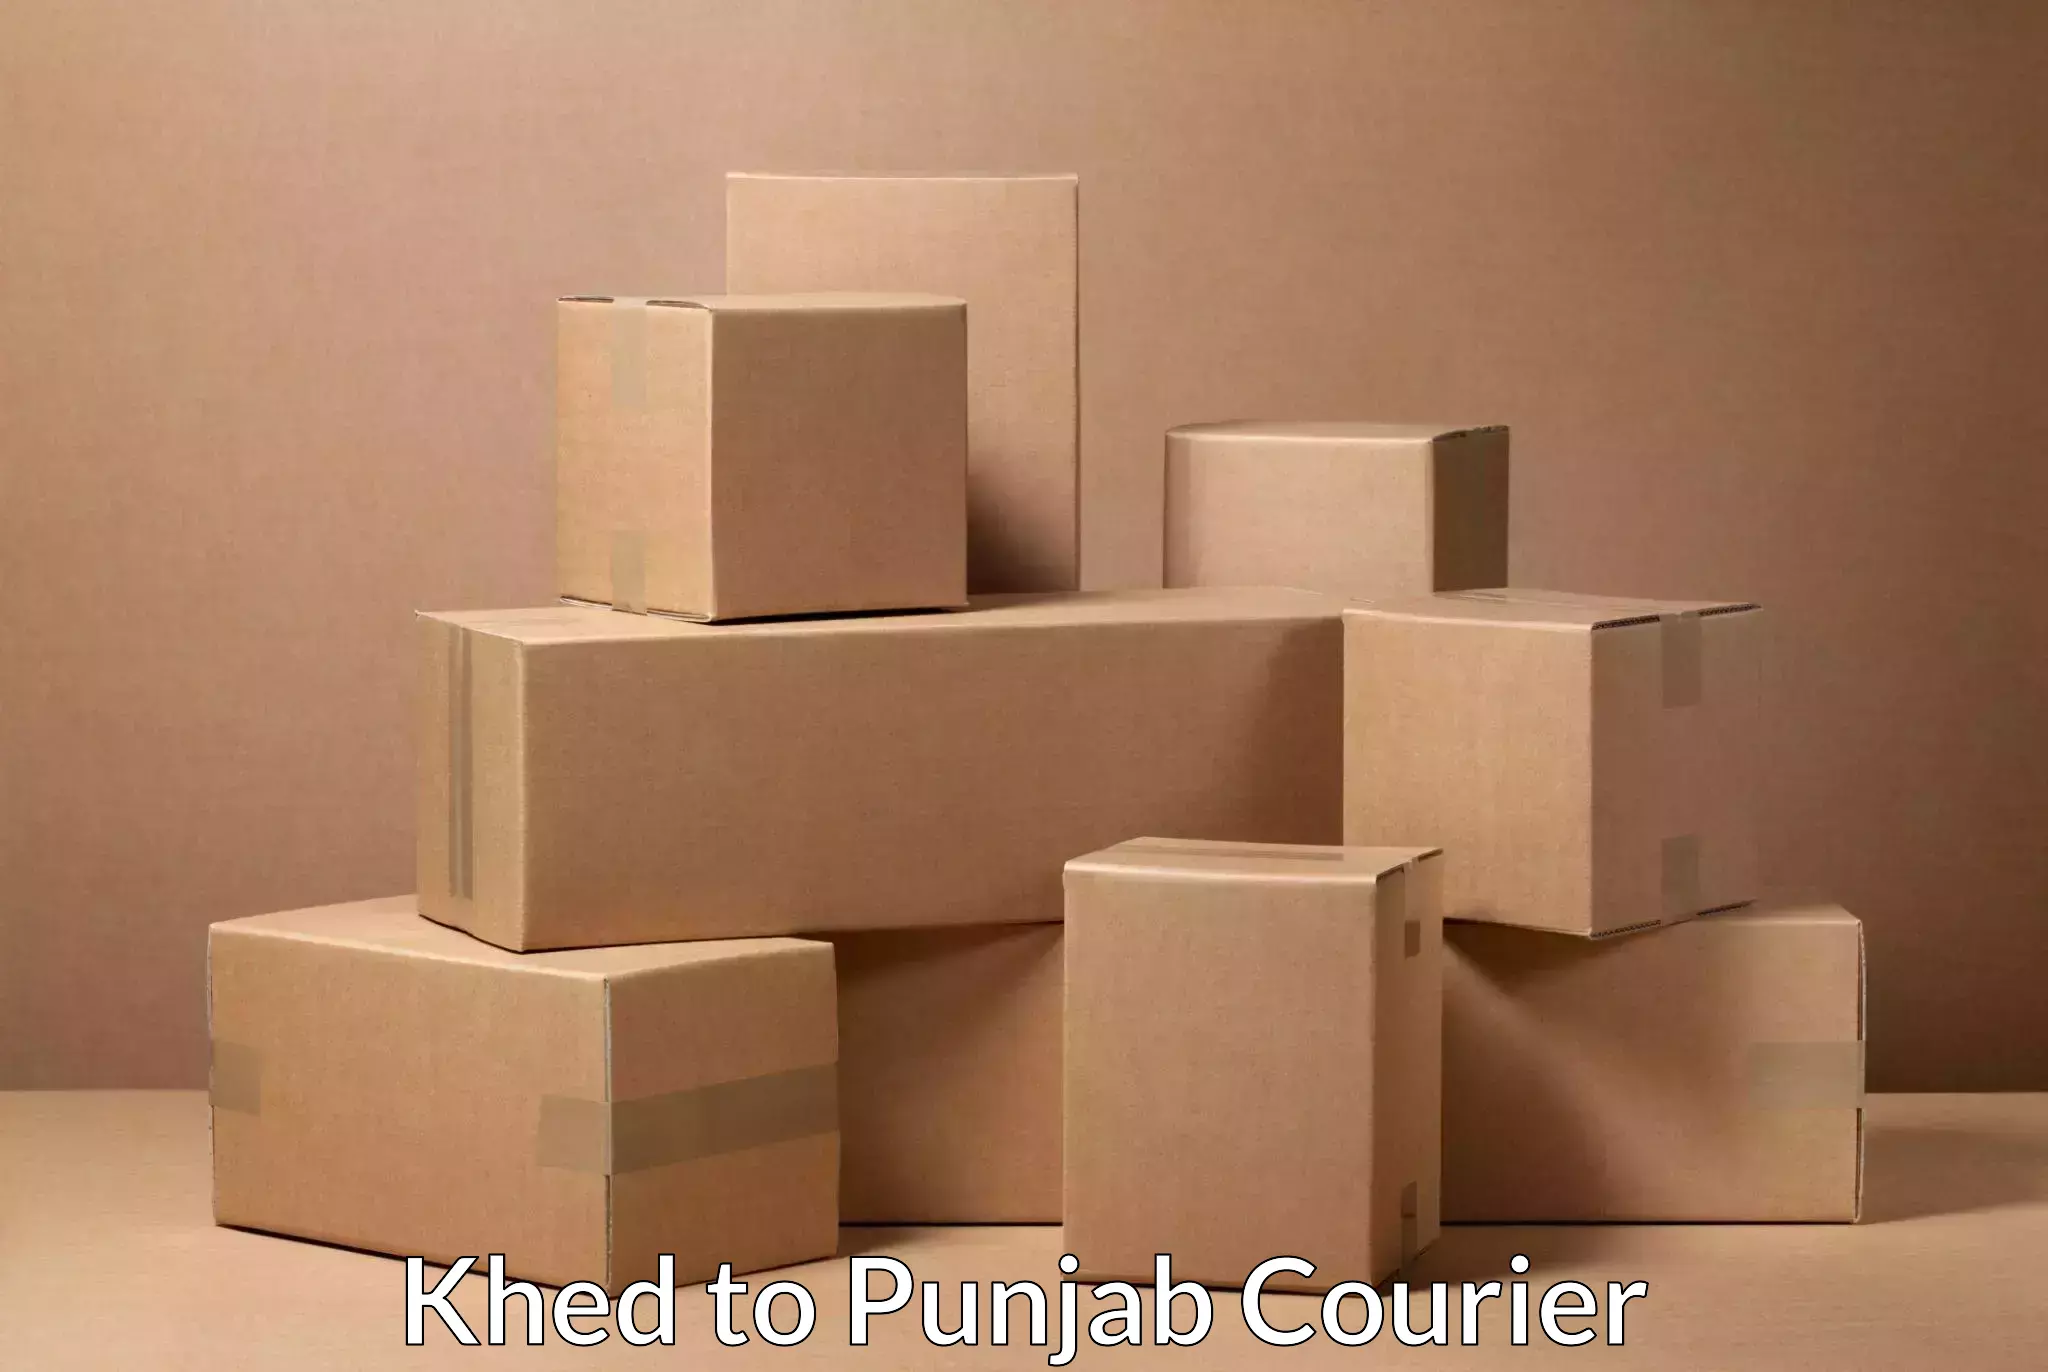 Overnight delivery services Khed to Punjab